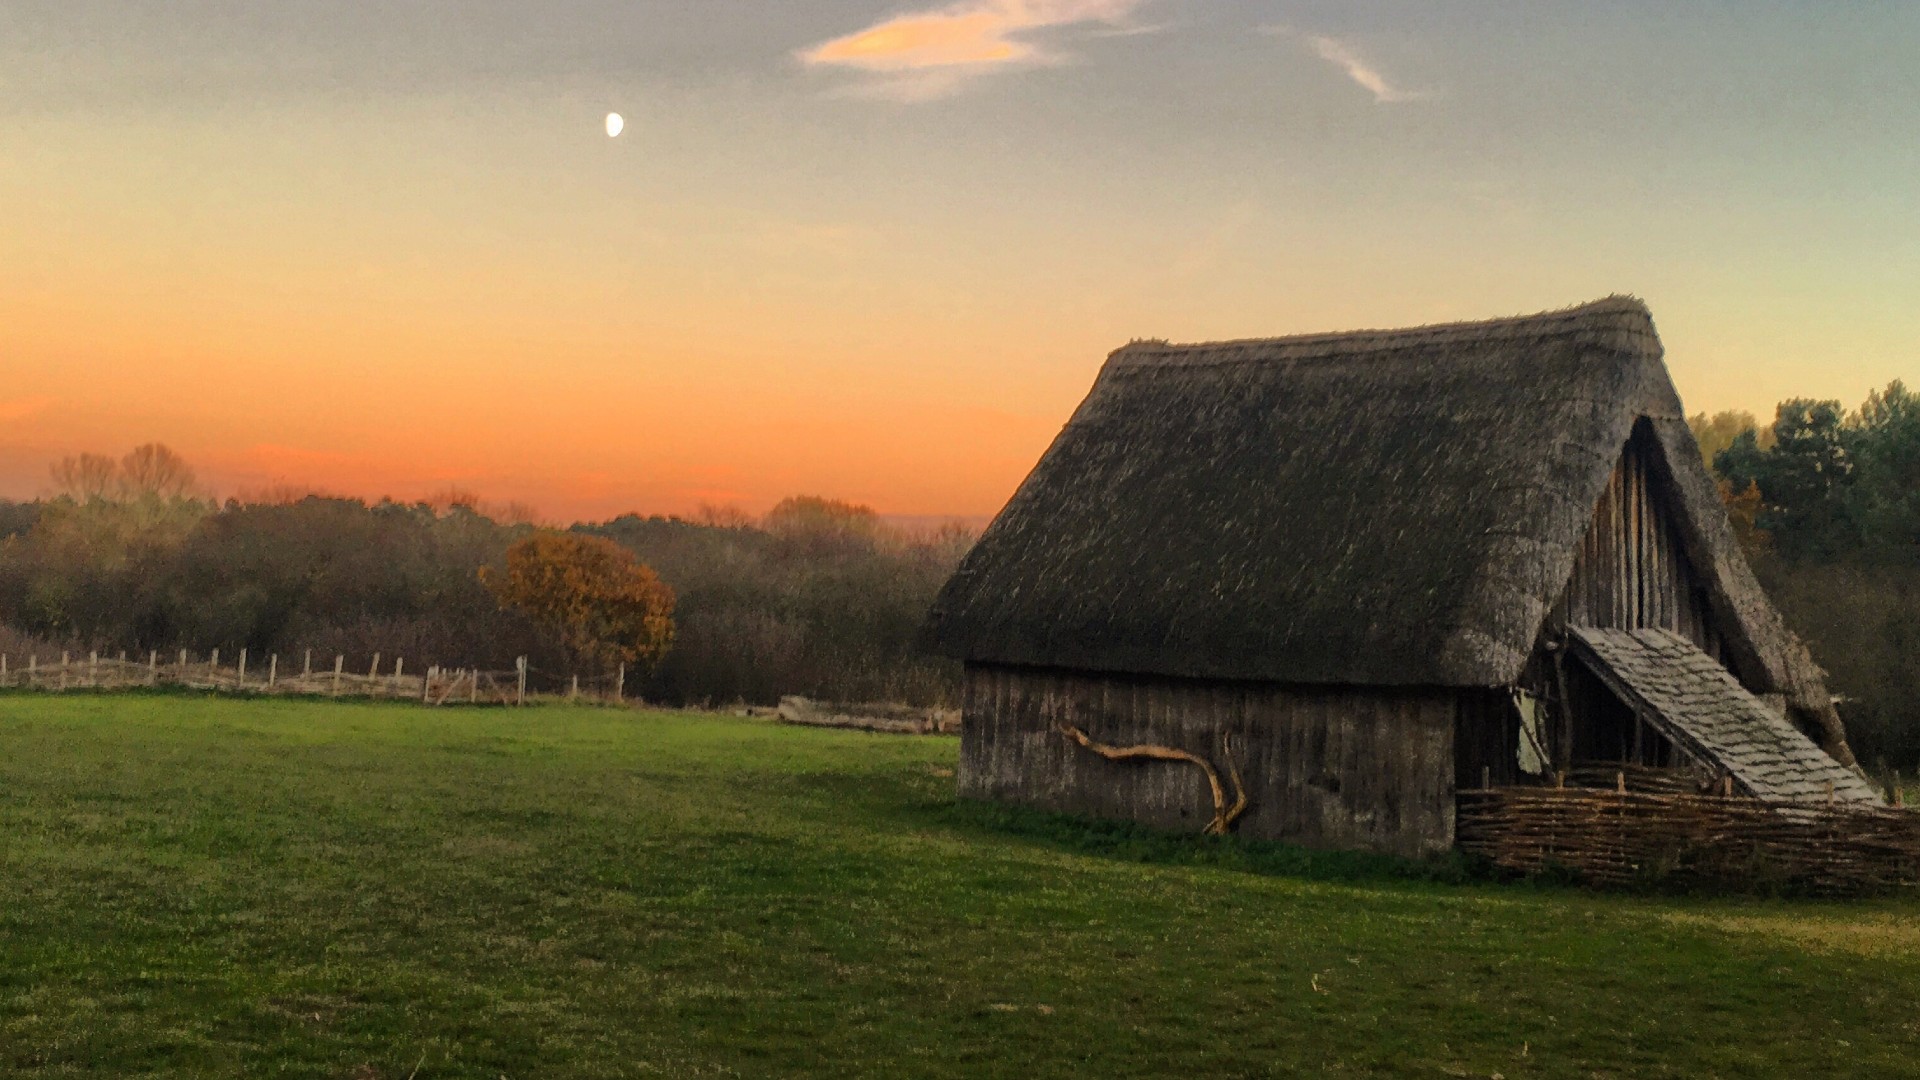 A recreated Anglo-Saxon village at West Stow park in Suffolk, England.